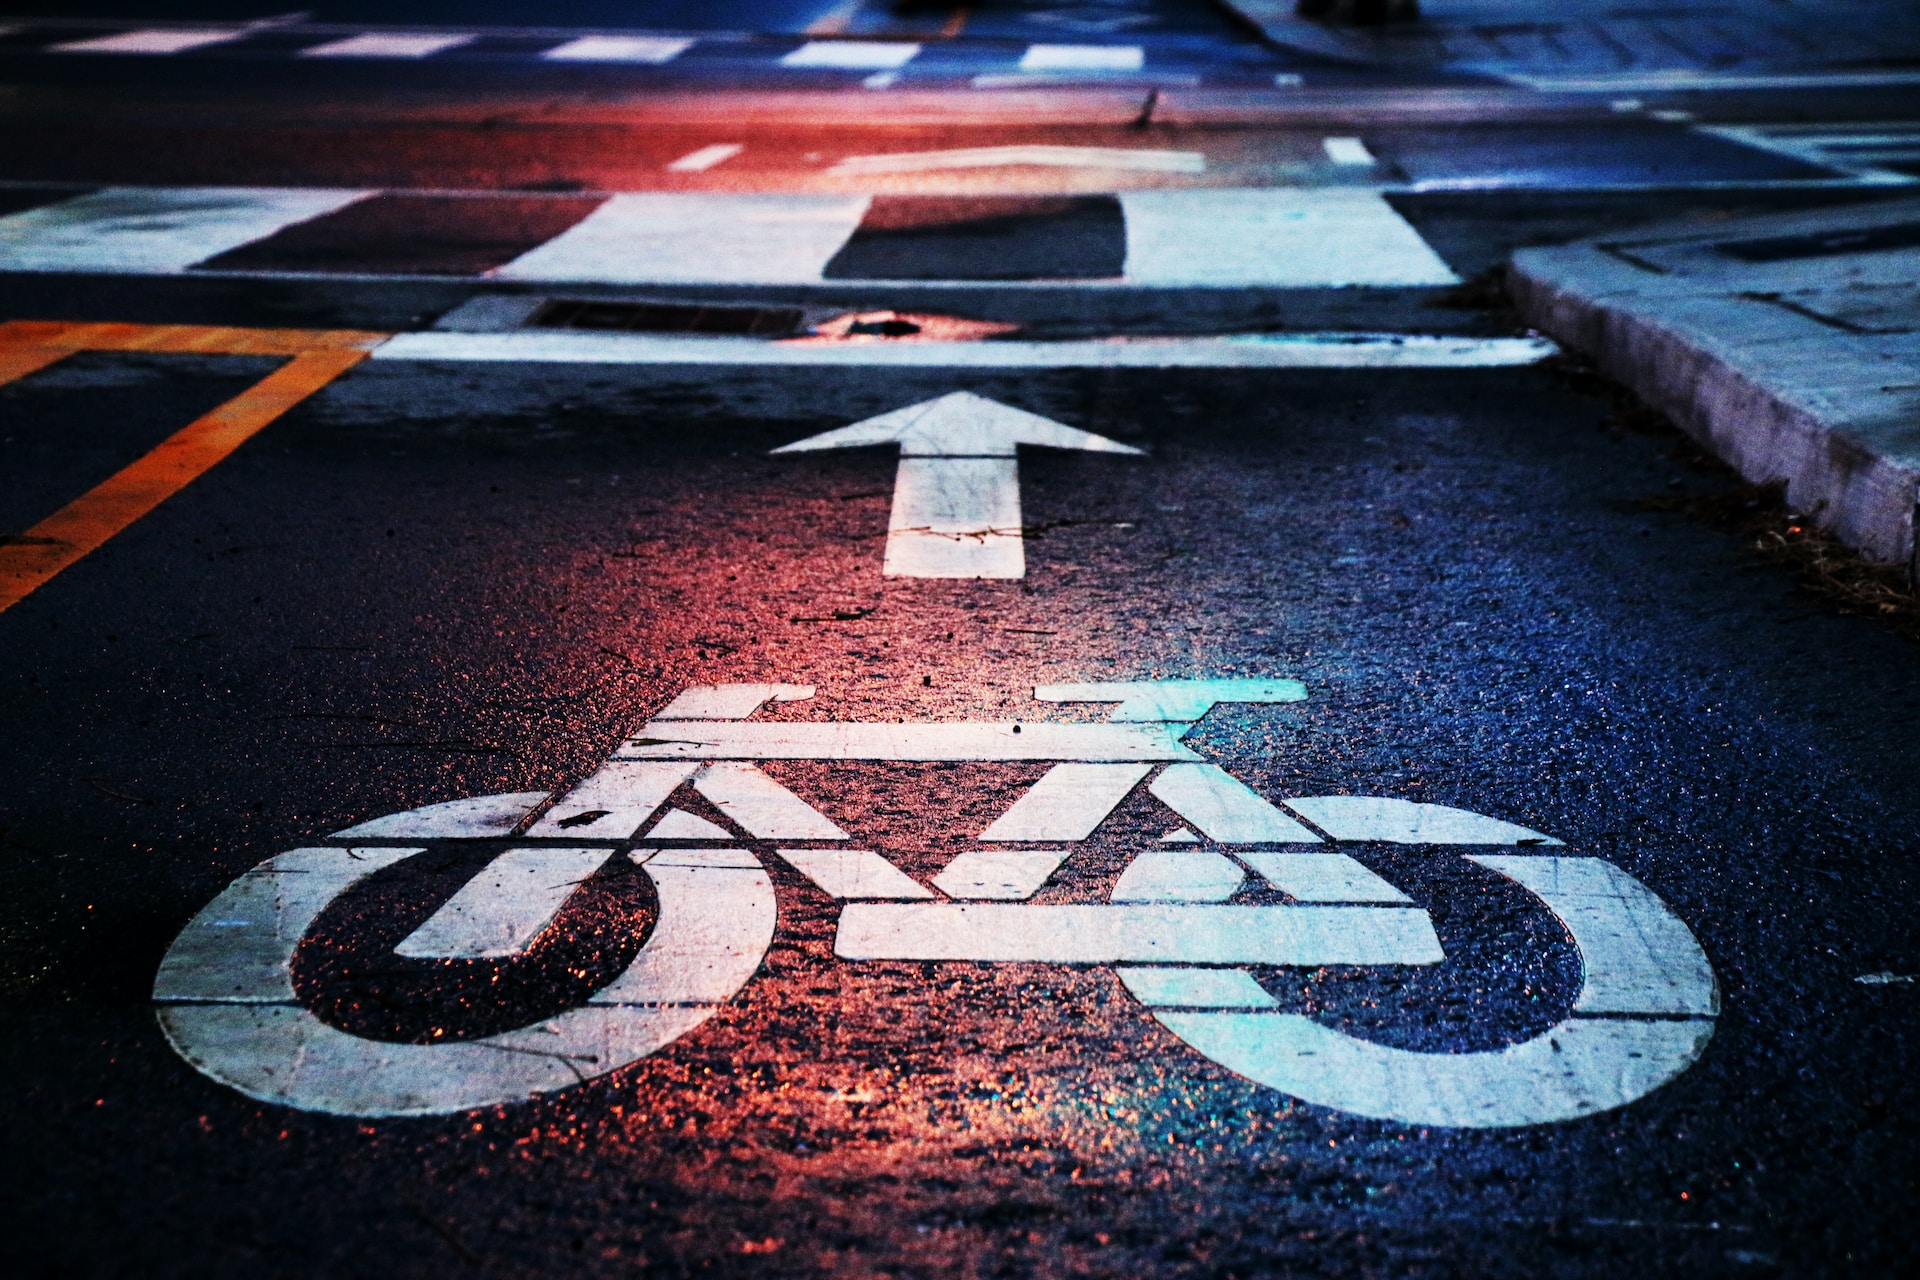 A bike lane sign on the road